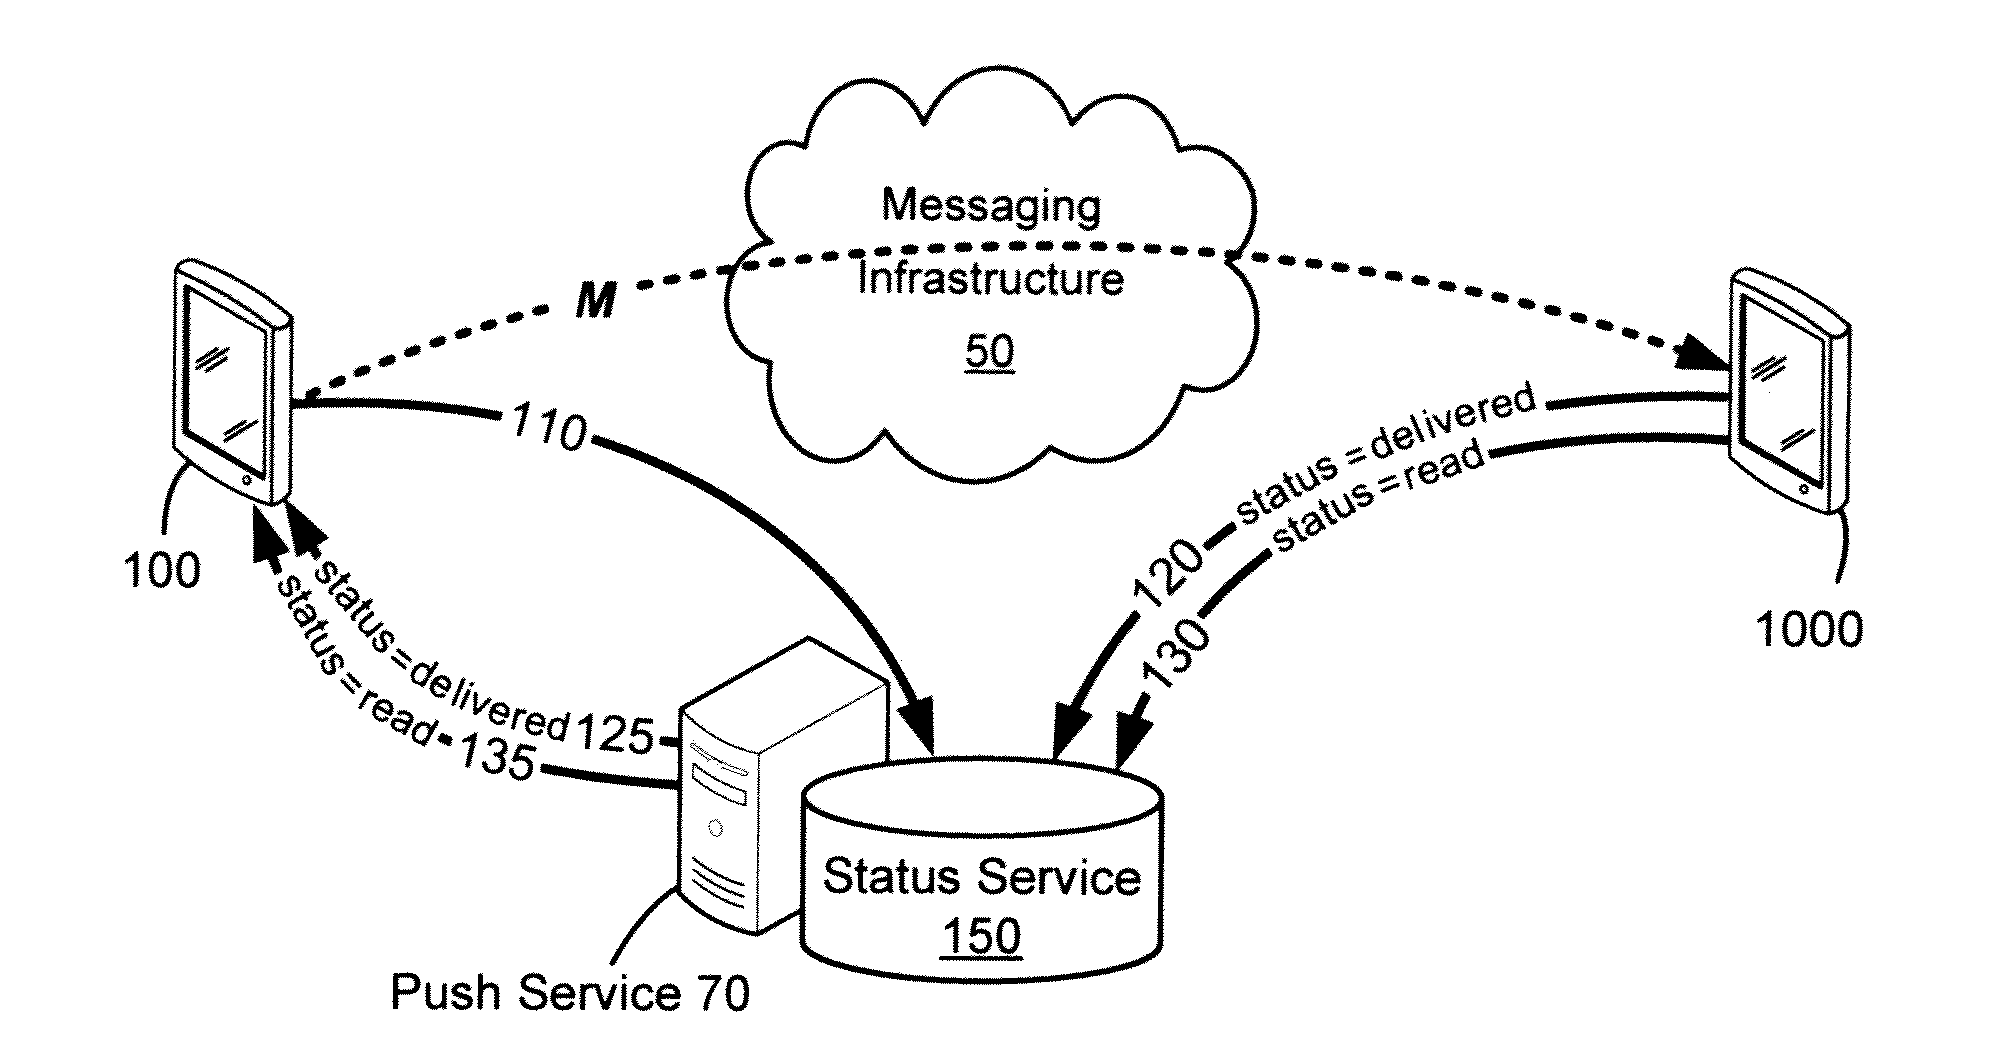 Delivery and management of status notifications for group messaging